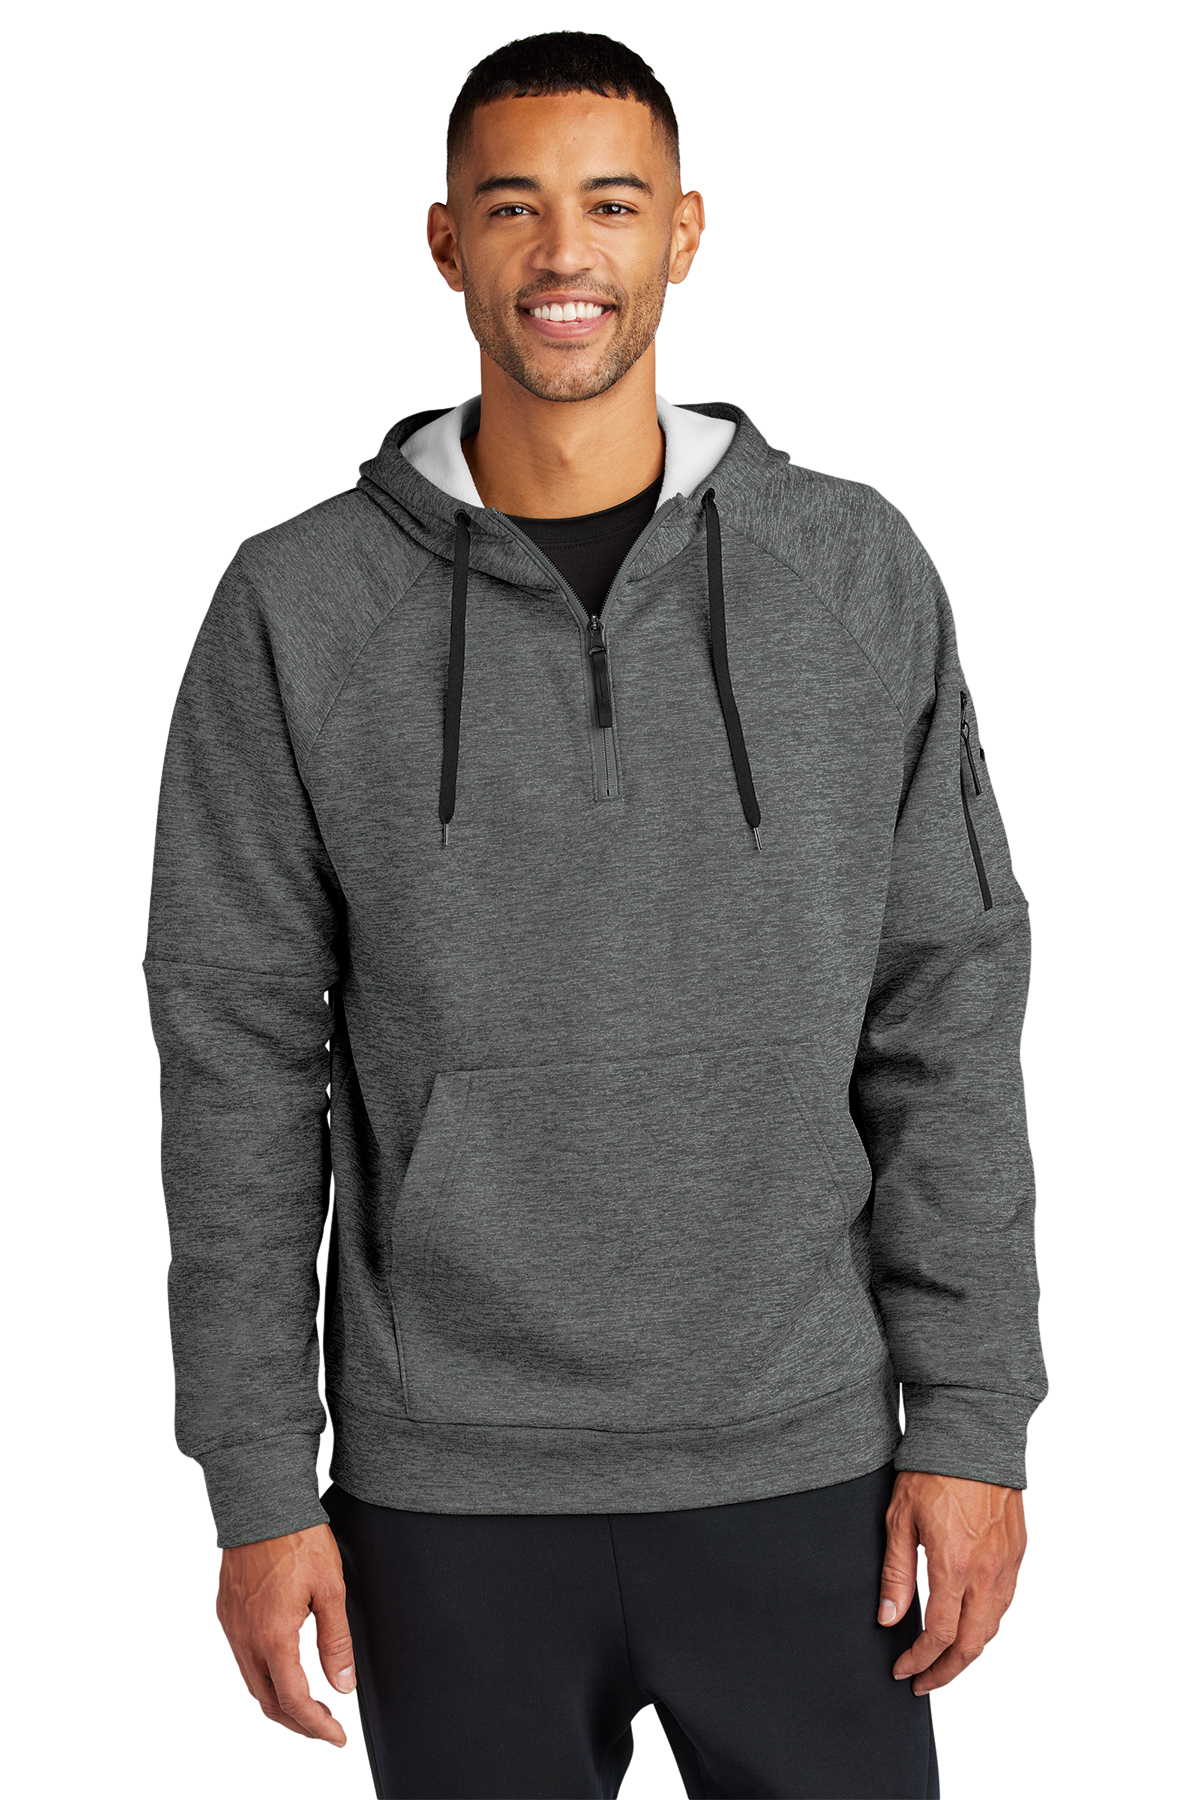 Nike Therma-FIT Pocket 1/4-Zip Fleece Hoodie | Product | Company Casuals